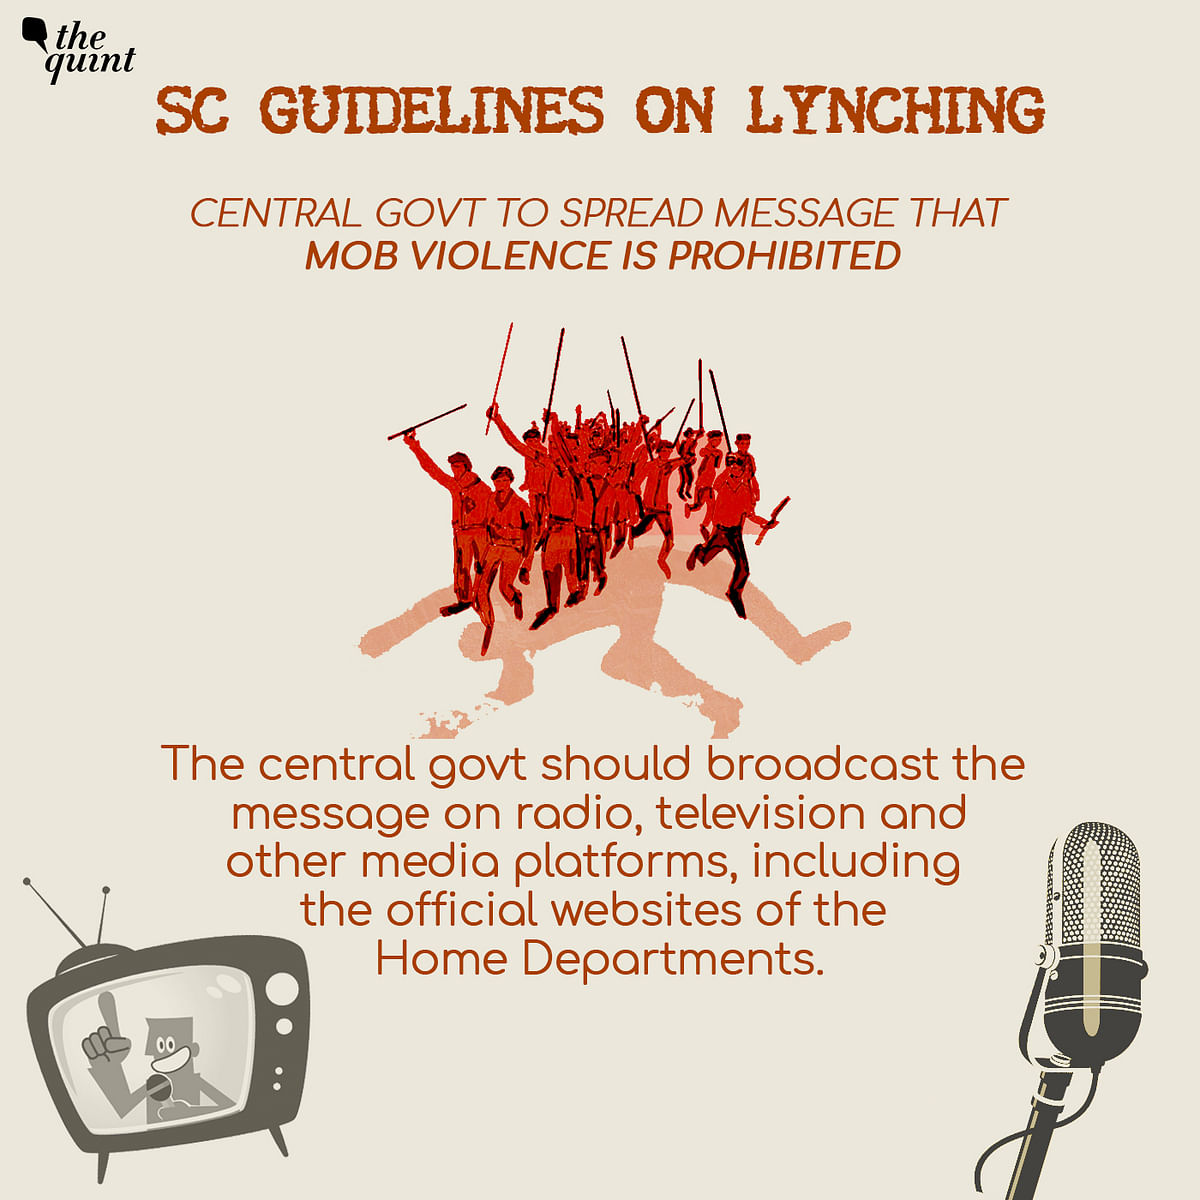 An investigation has exposed the govt’s ‘lack of political will’ to spread the message that lynchings are prohibited